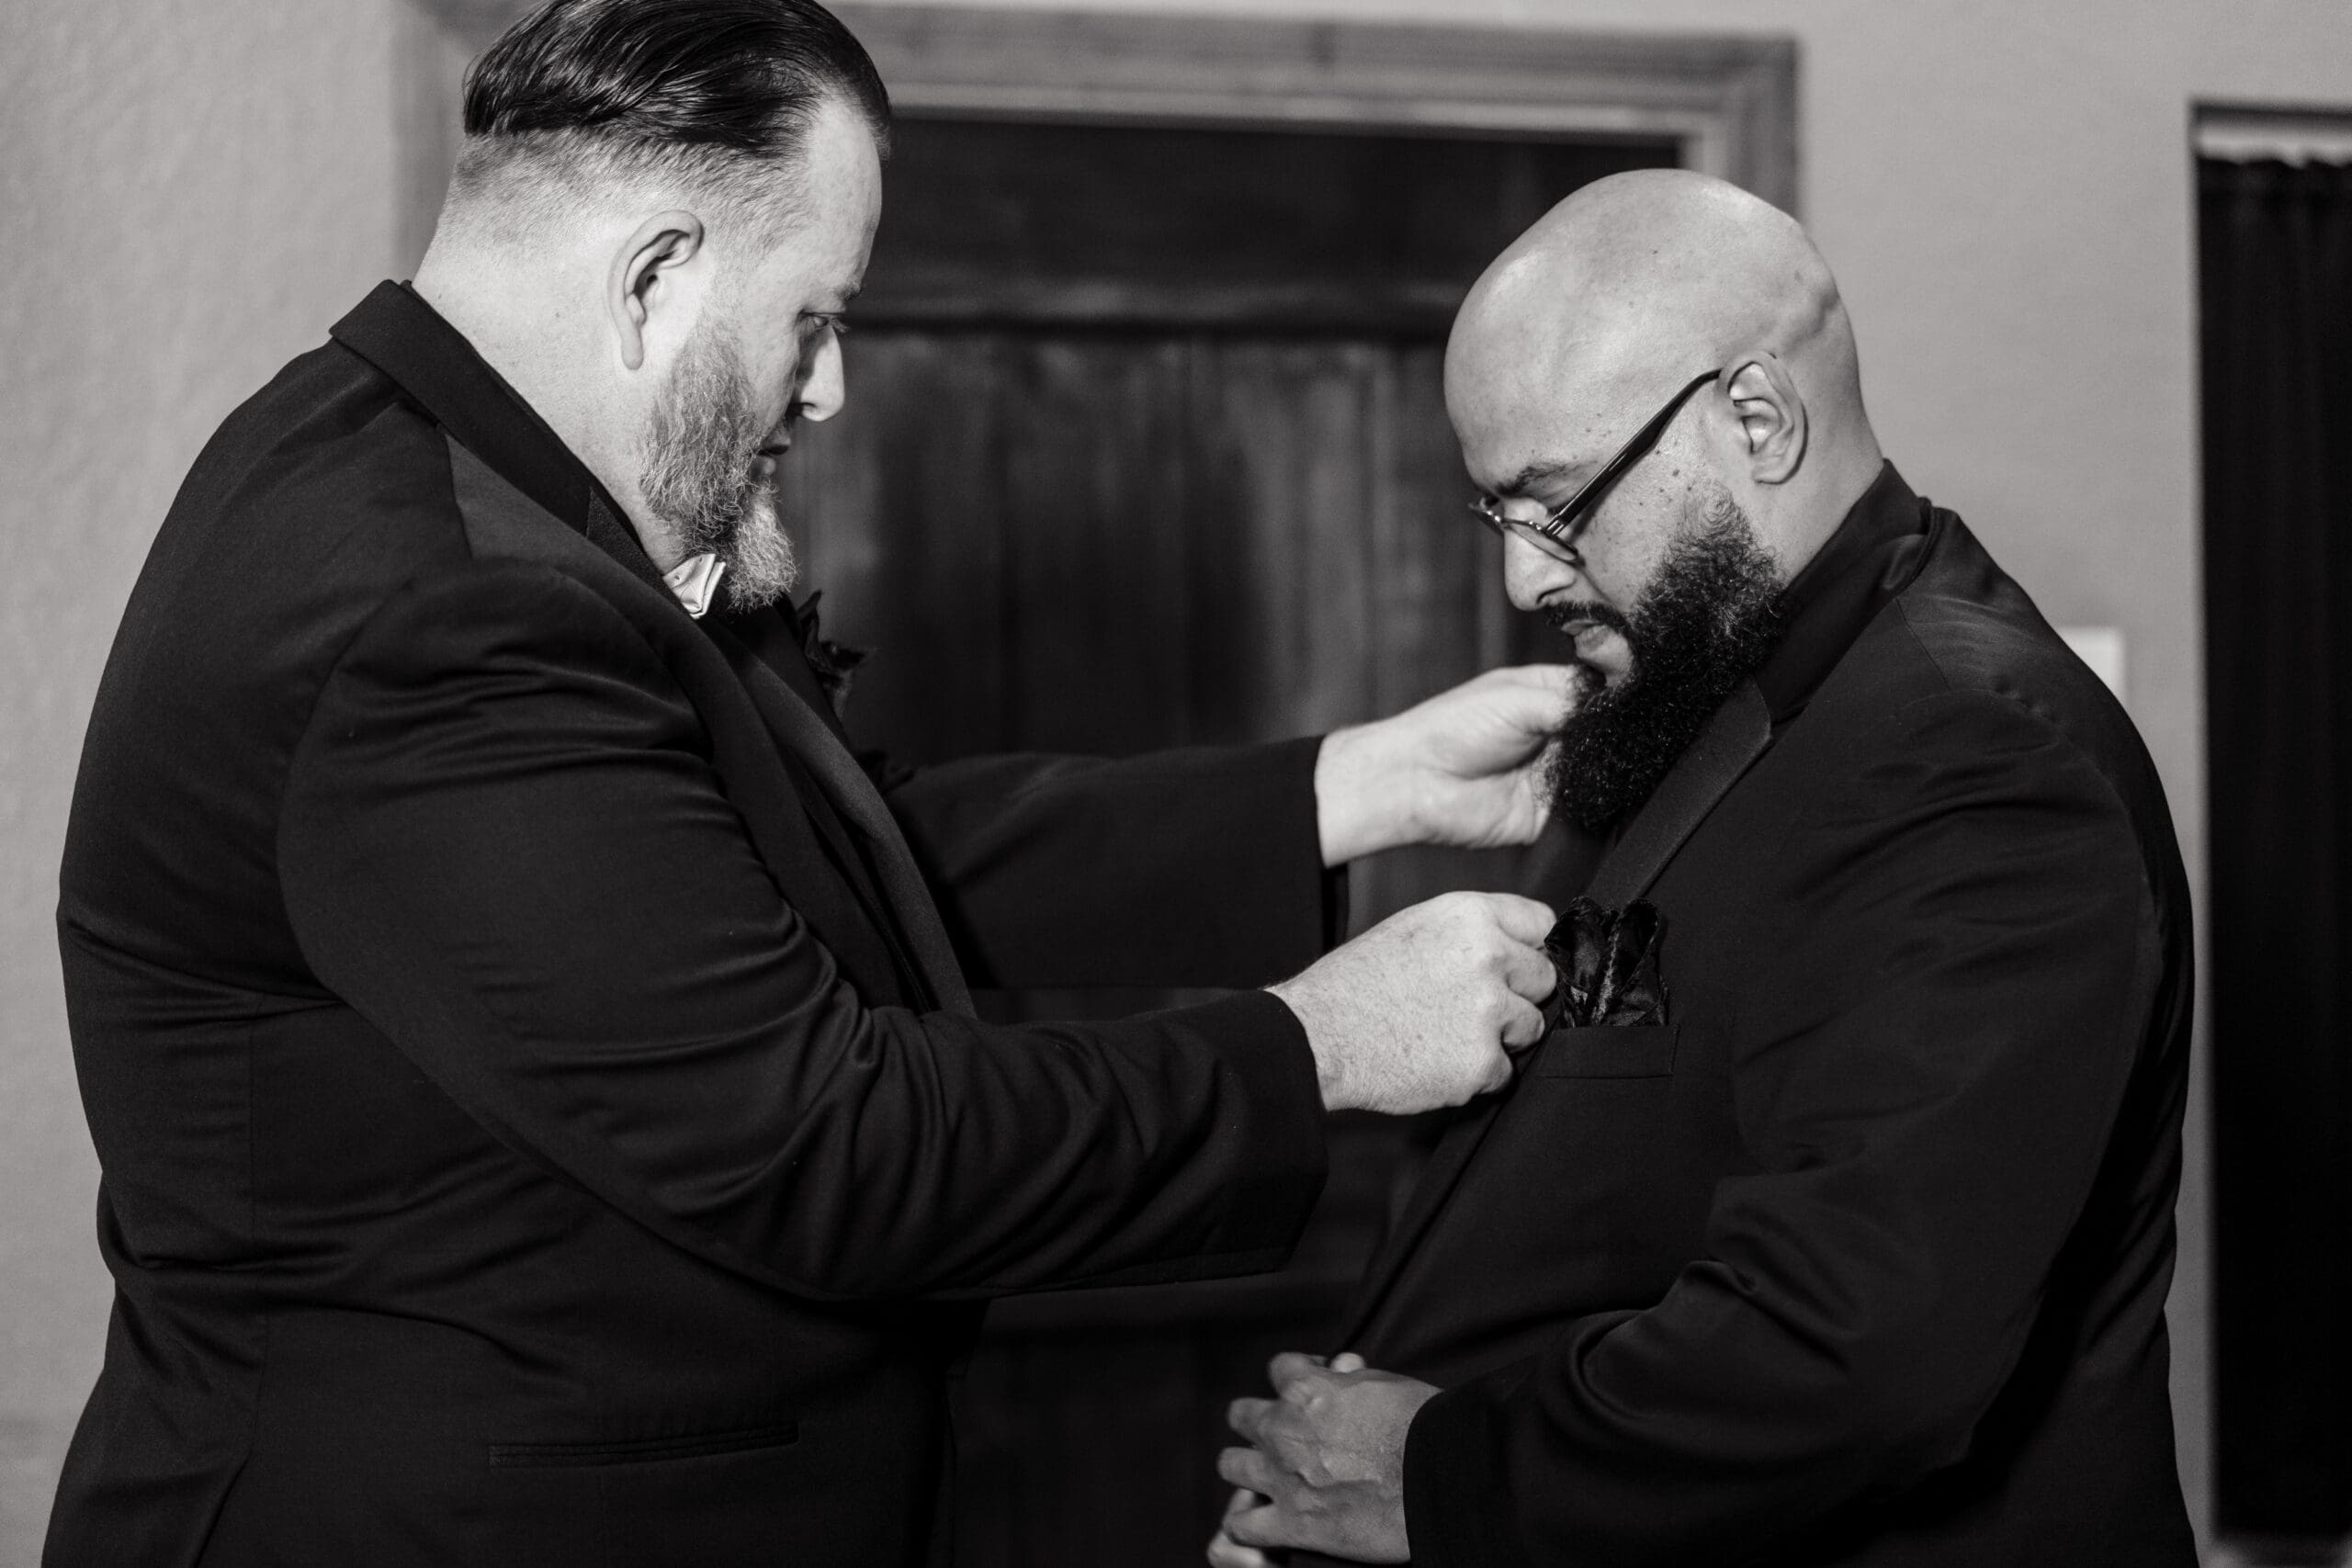 Groom David having his suit adjusted by his best man